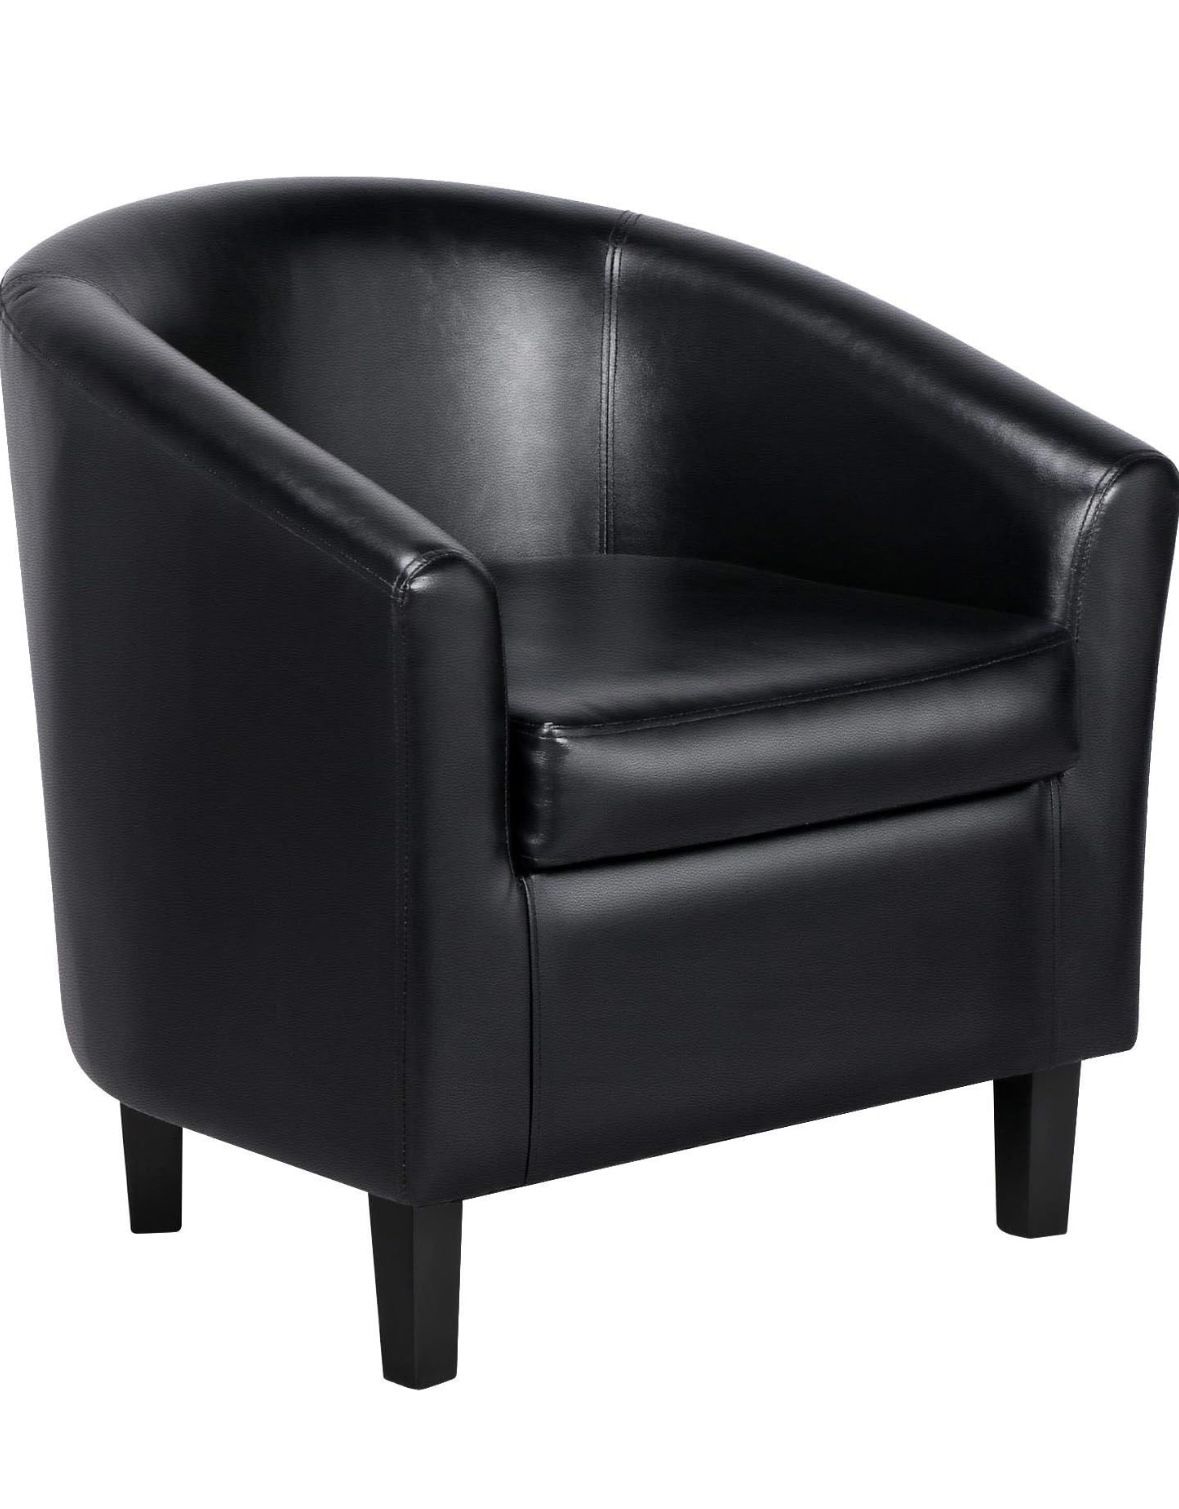 Accent Chair, Faux Leather Barrel Chair Cozy Modern Armchair Club Chair with Soft Padded and Sturdy Legs for Living Room/bedroom. Black